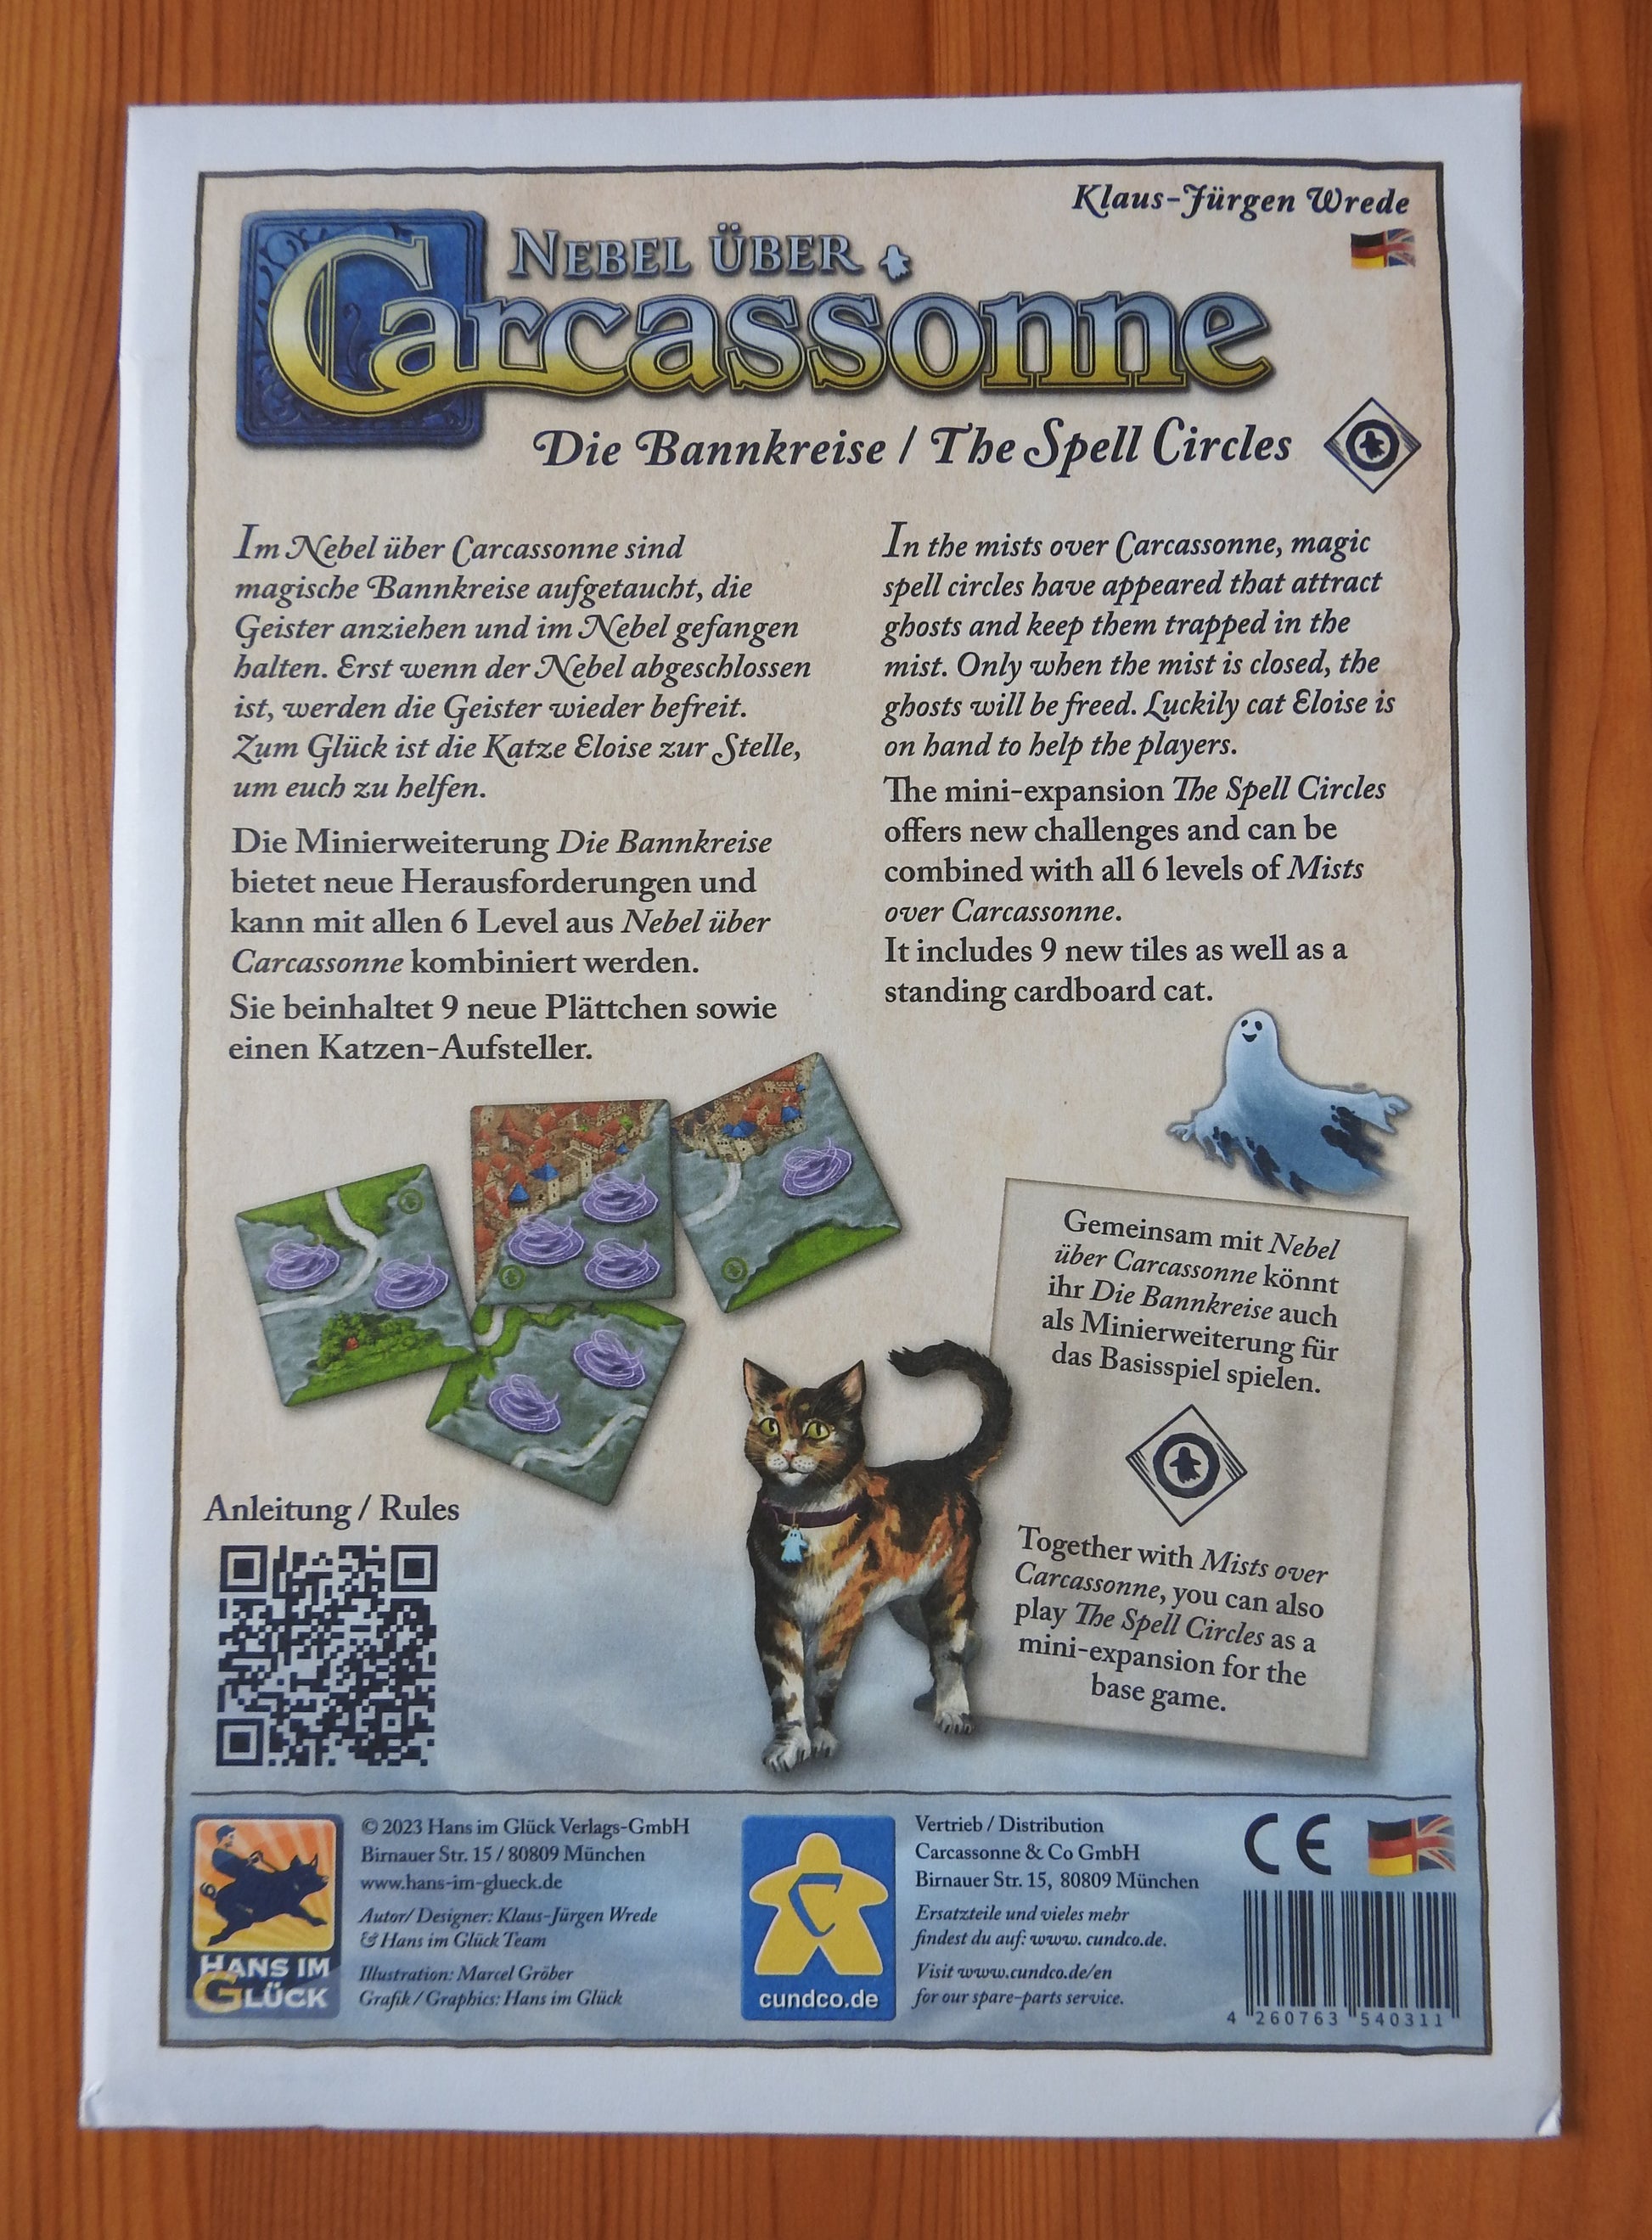 View of the envelope that the Spell Circles mini expansion comes in, that includes introductory text in both England and German.